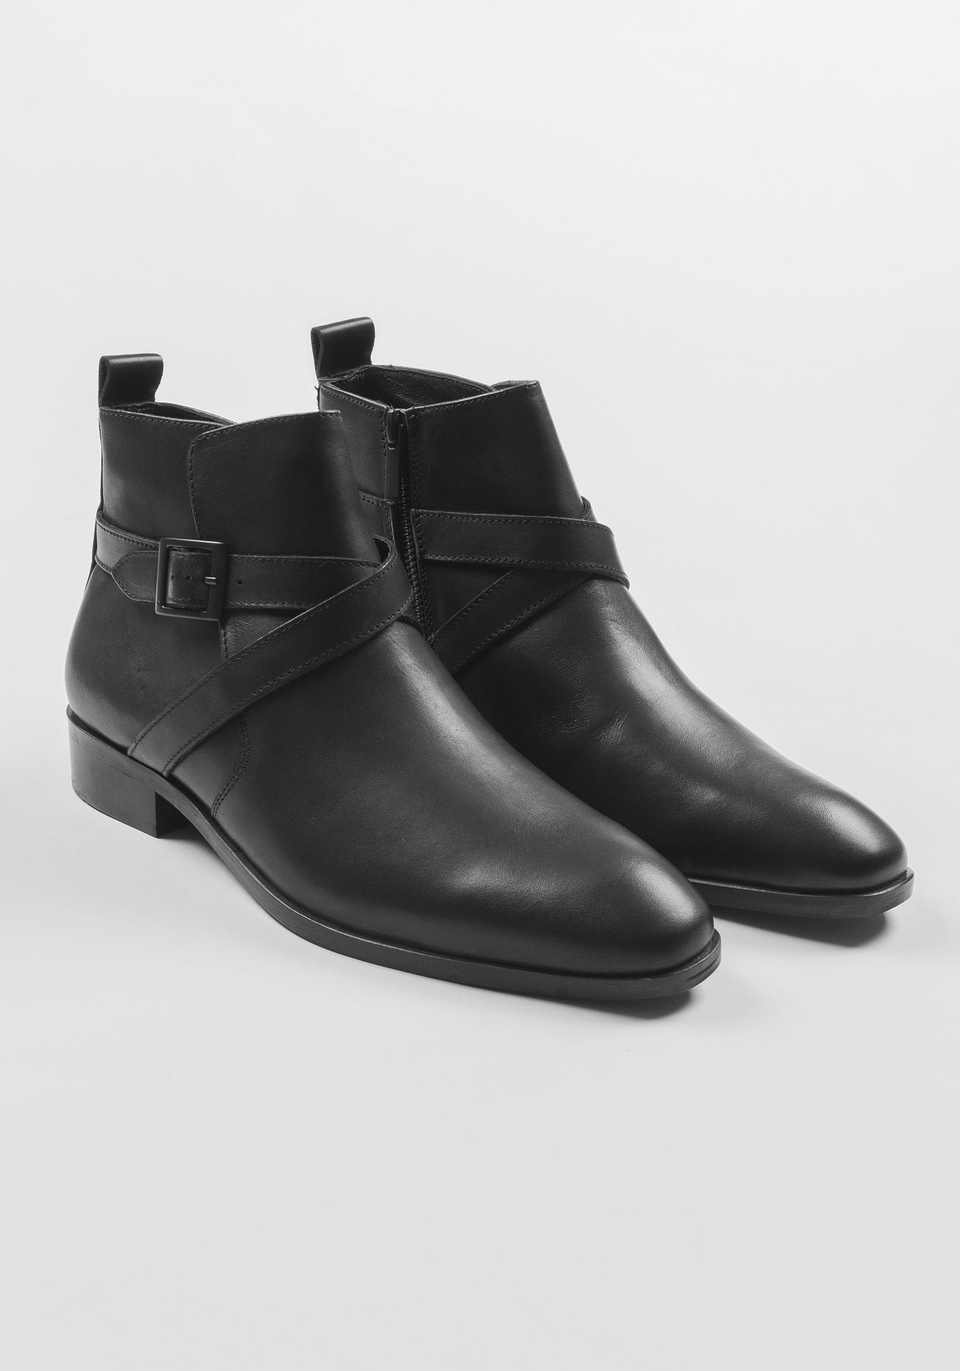 LEATHER CHELSEA BOOT WITH STRAP DETAIL - Antony Morato Online Shop